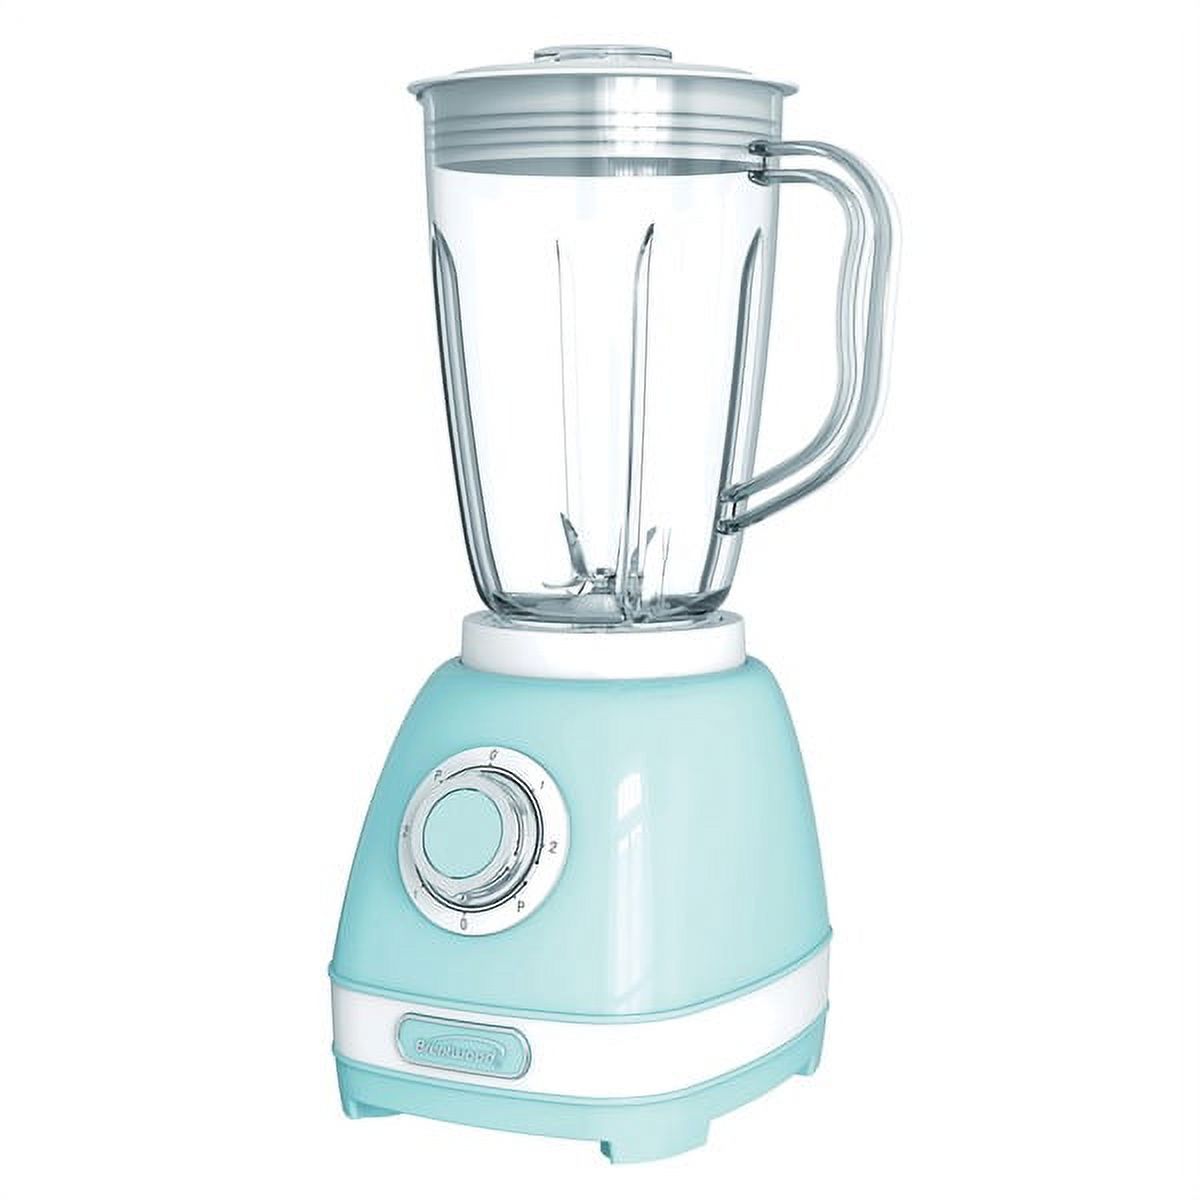 Brentwood Appliances Jb-330bl 2-speed Retro Blender With 50-Ounce Plastic Jar - image 1 of 7